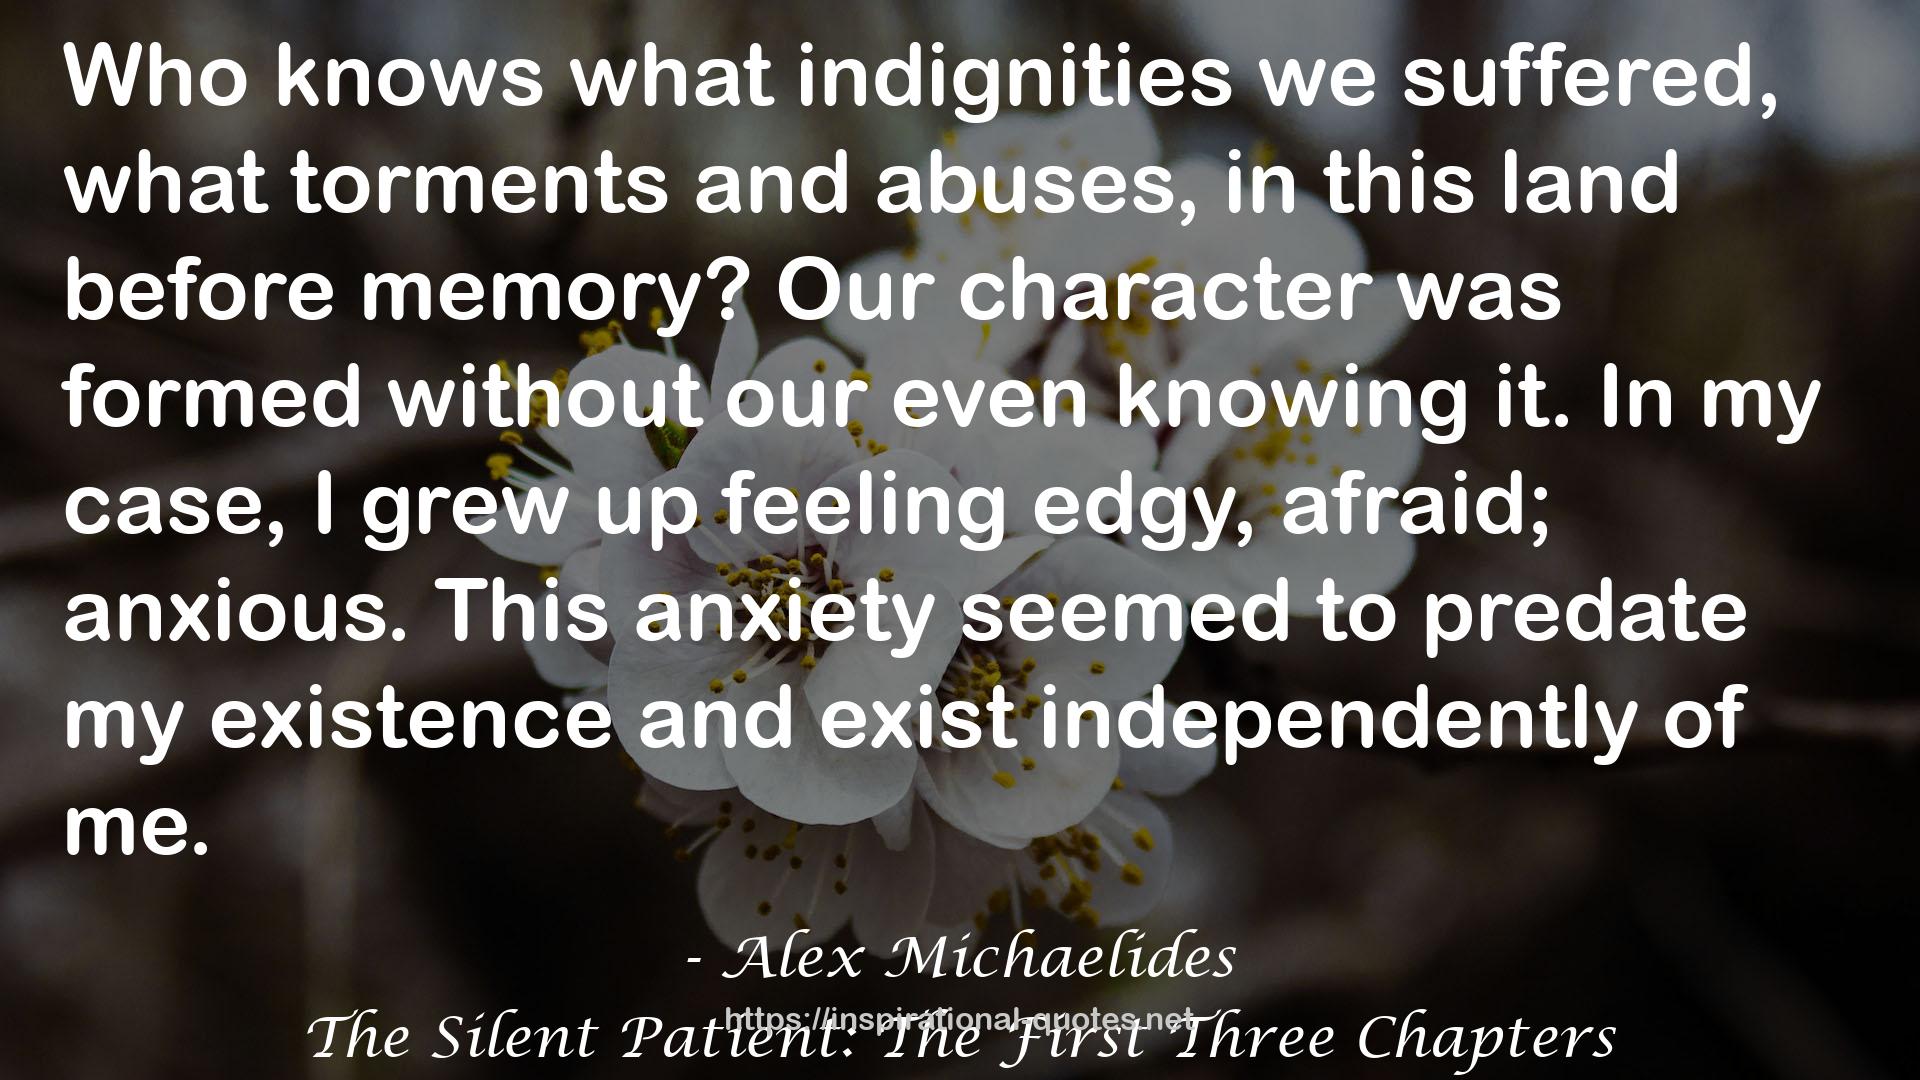 The Silent Patient: The First Three Chapters QUOTES